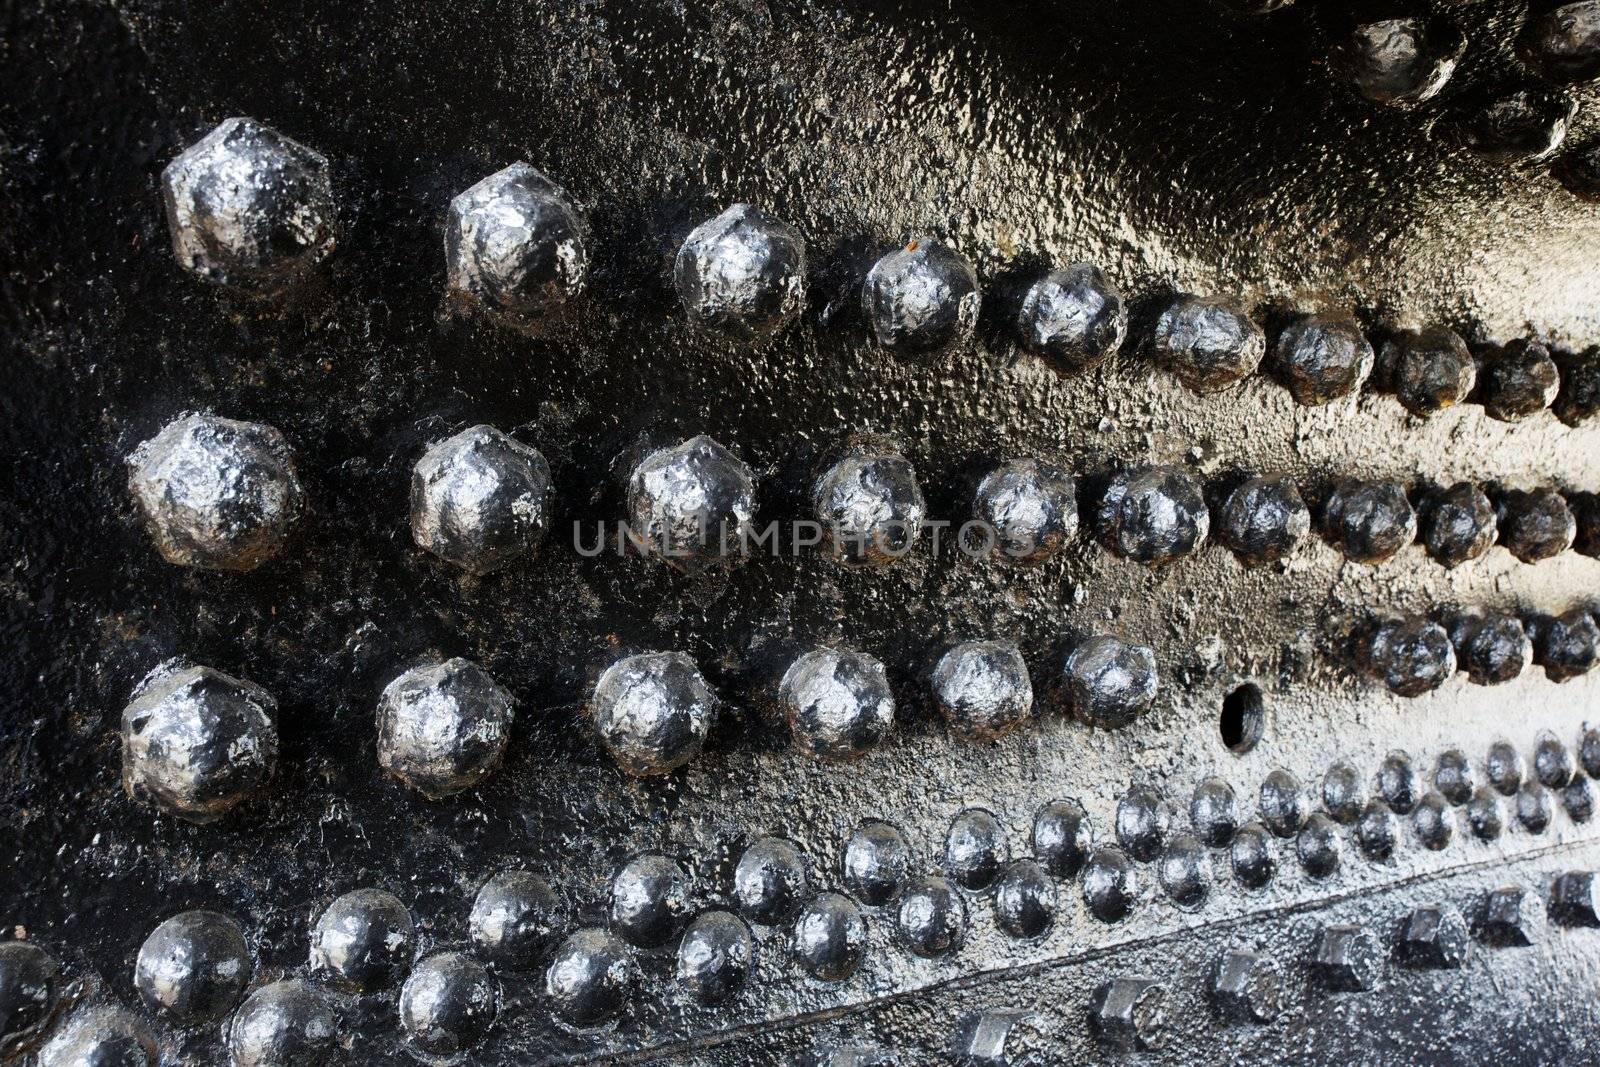 Black rivets in perspective on a train engine boiler